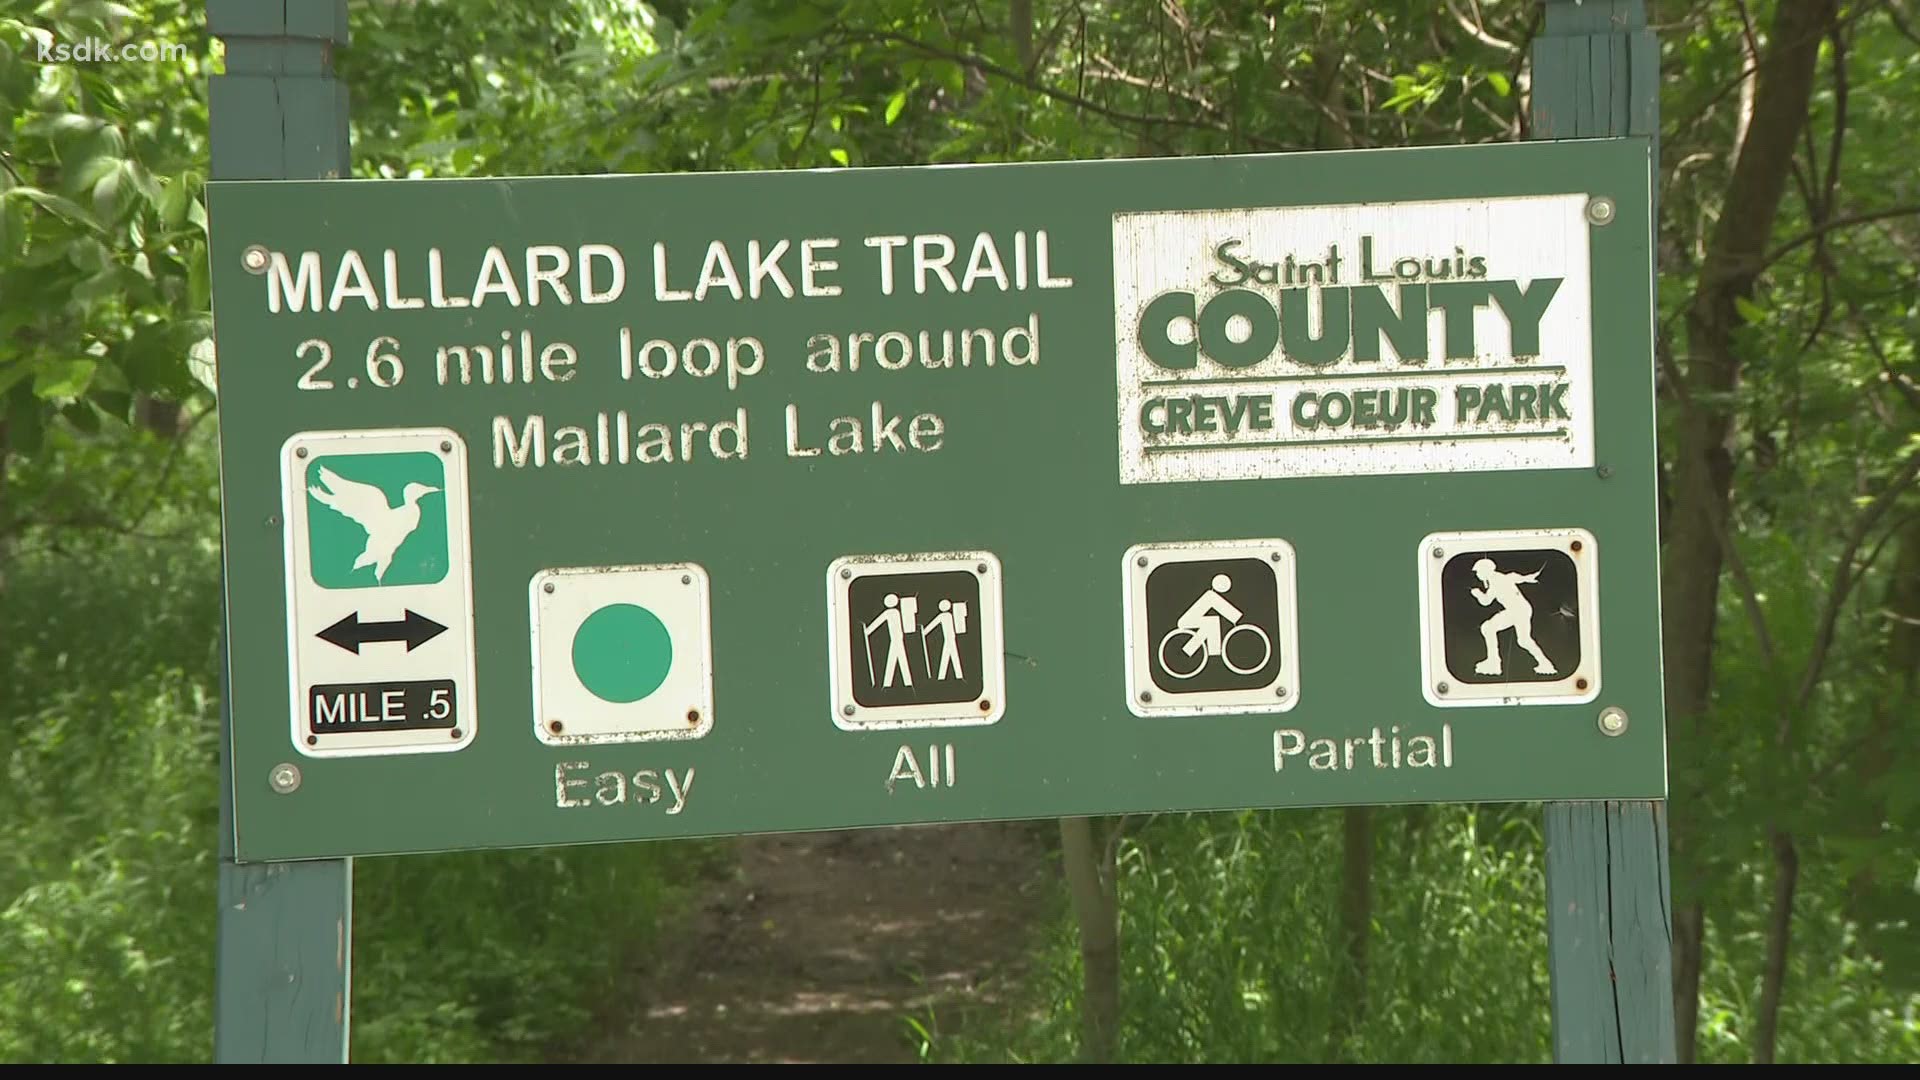 Police said the three separate incidents occurred at Creve Coeur Lake in the last four months